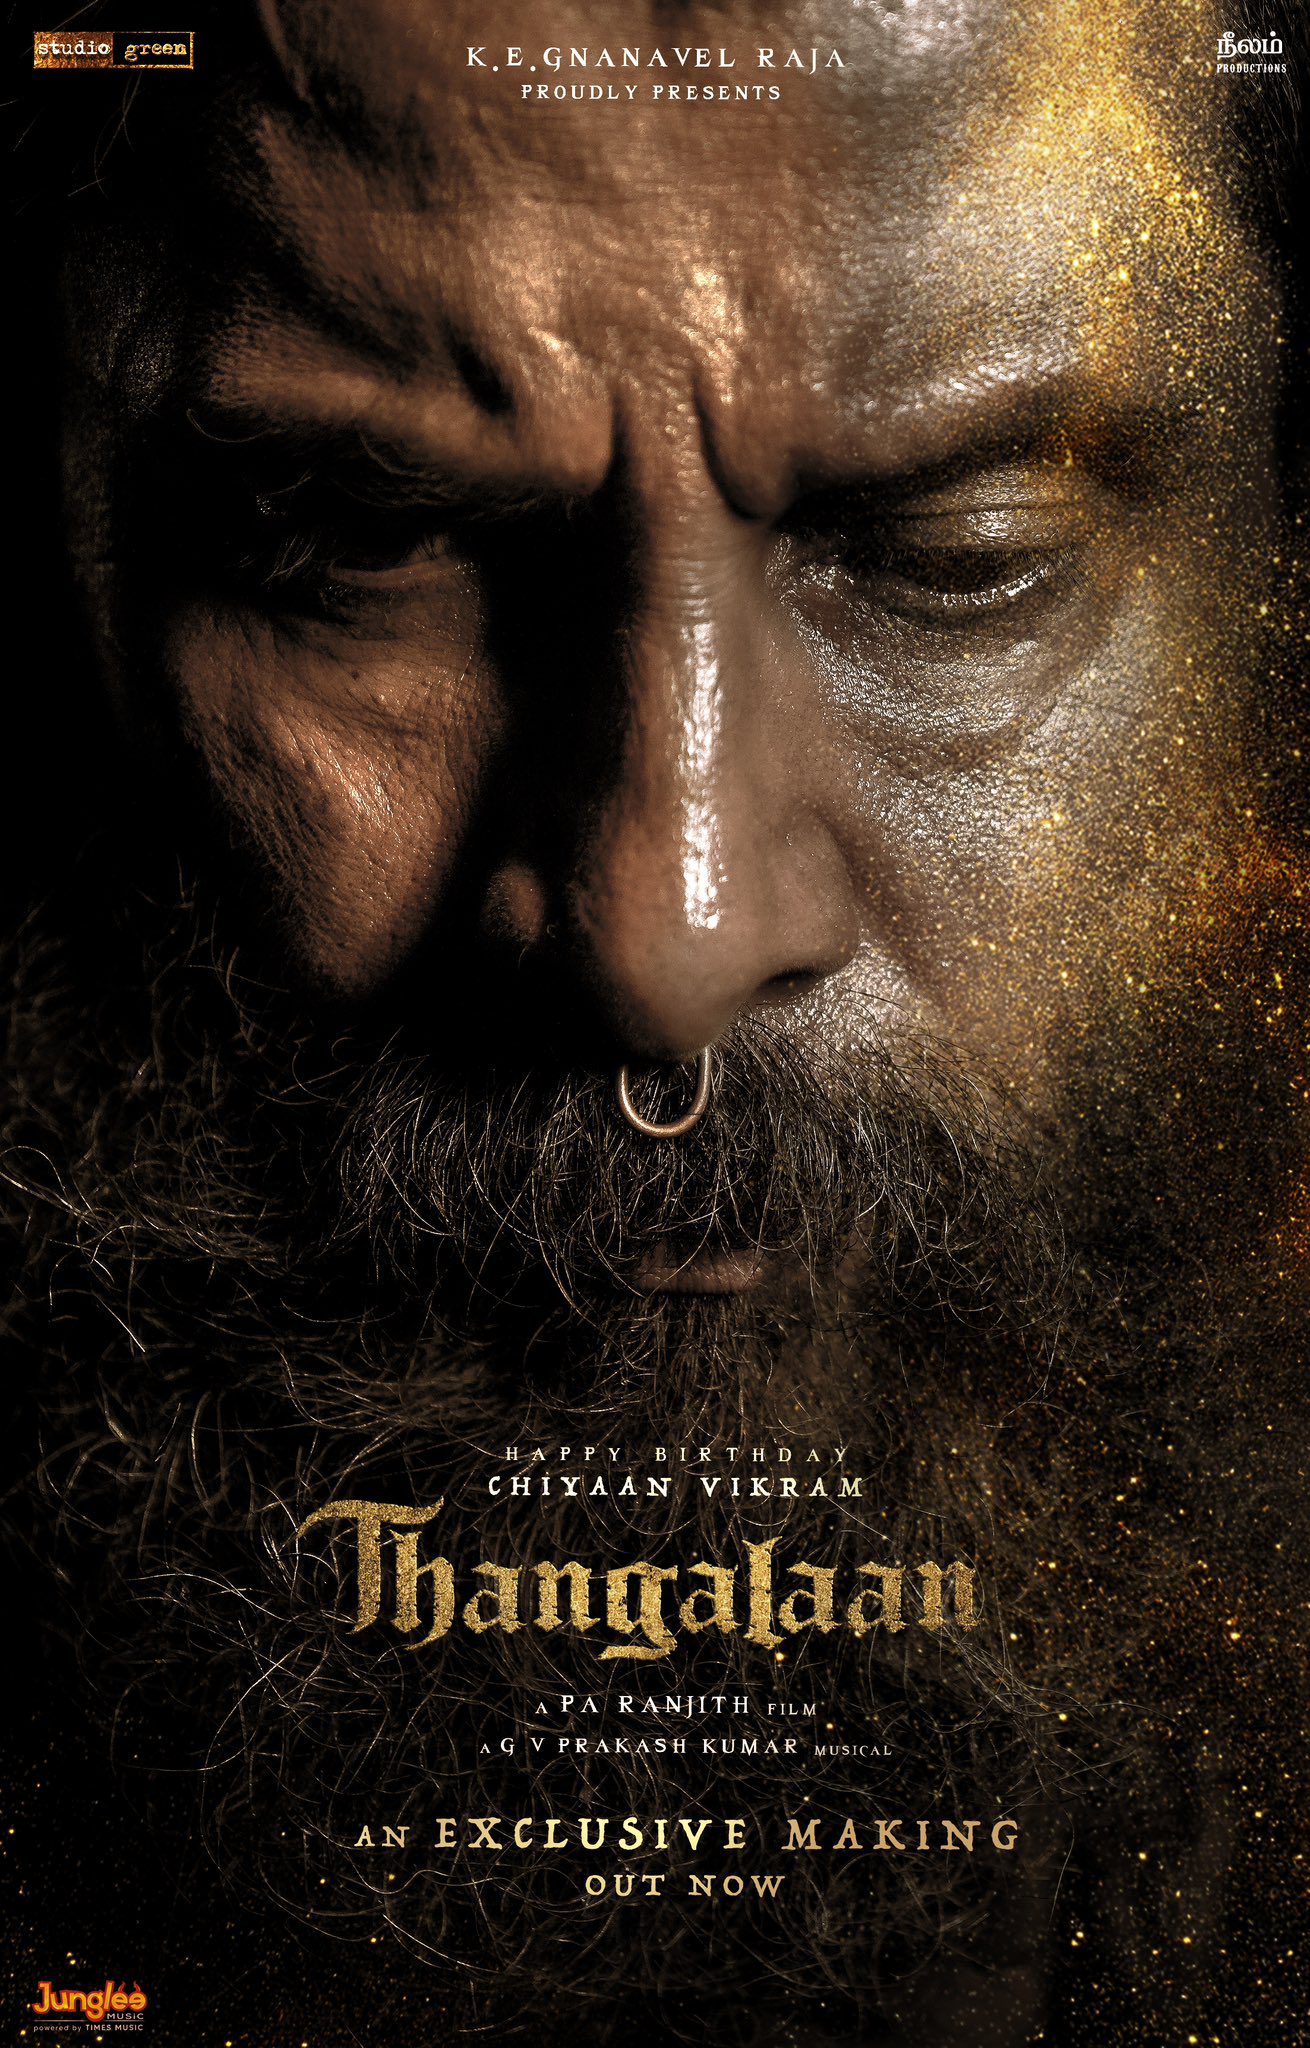 On Vikram's birthday, Thangalaan movie first poster announced